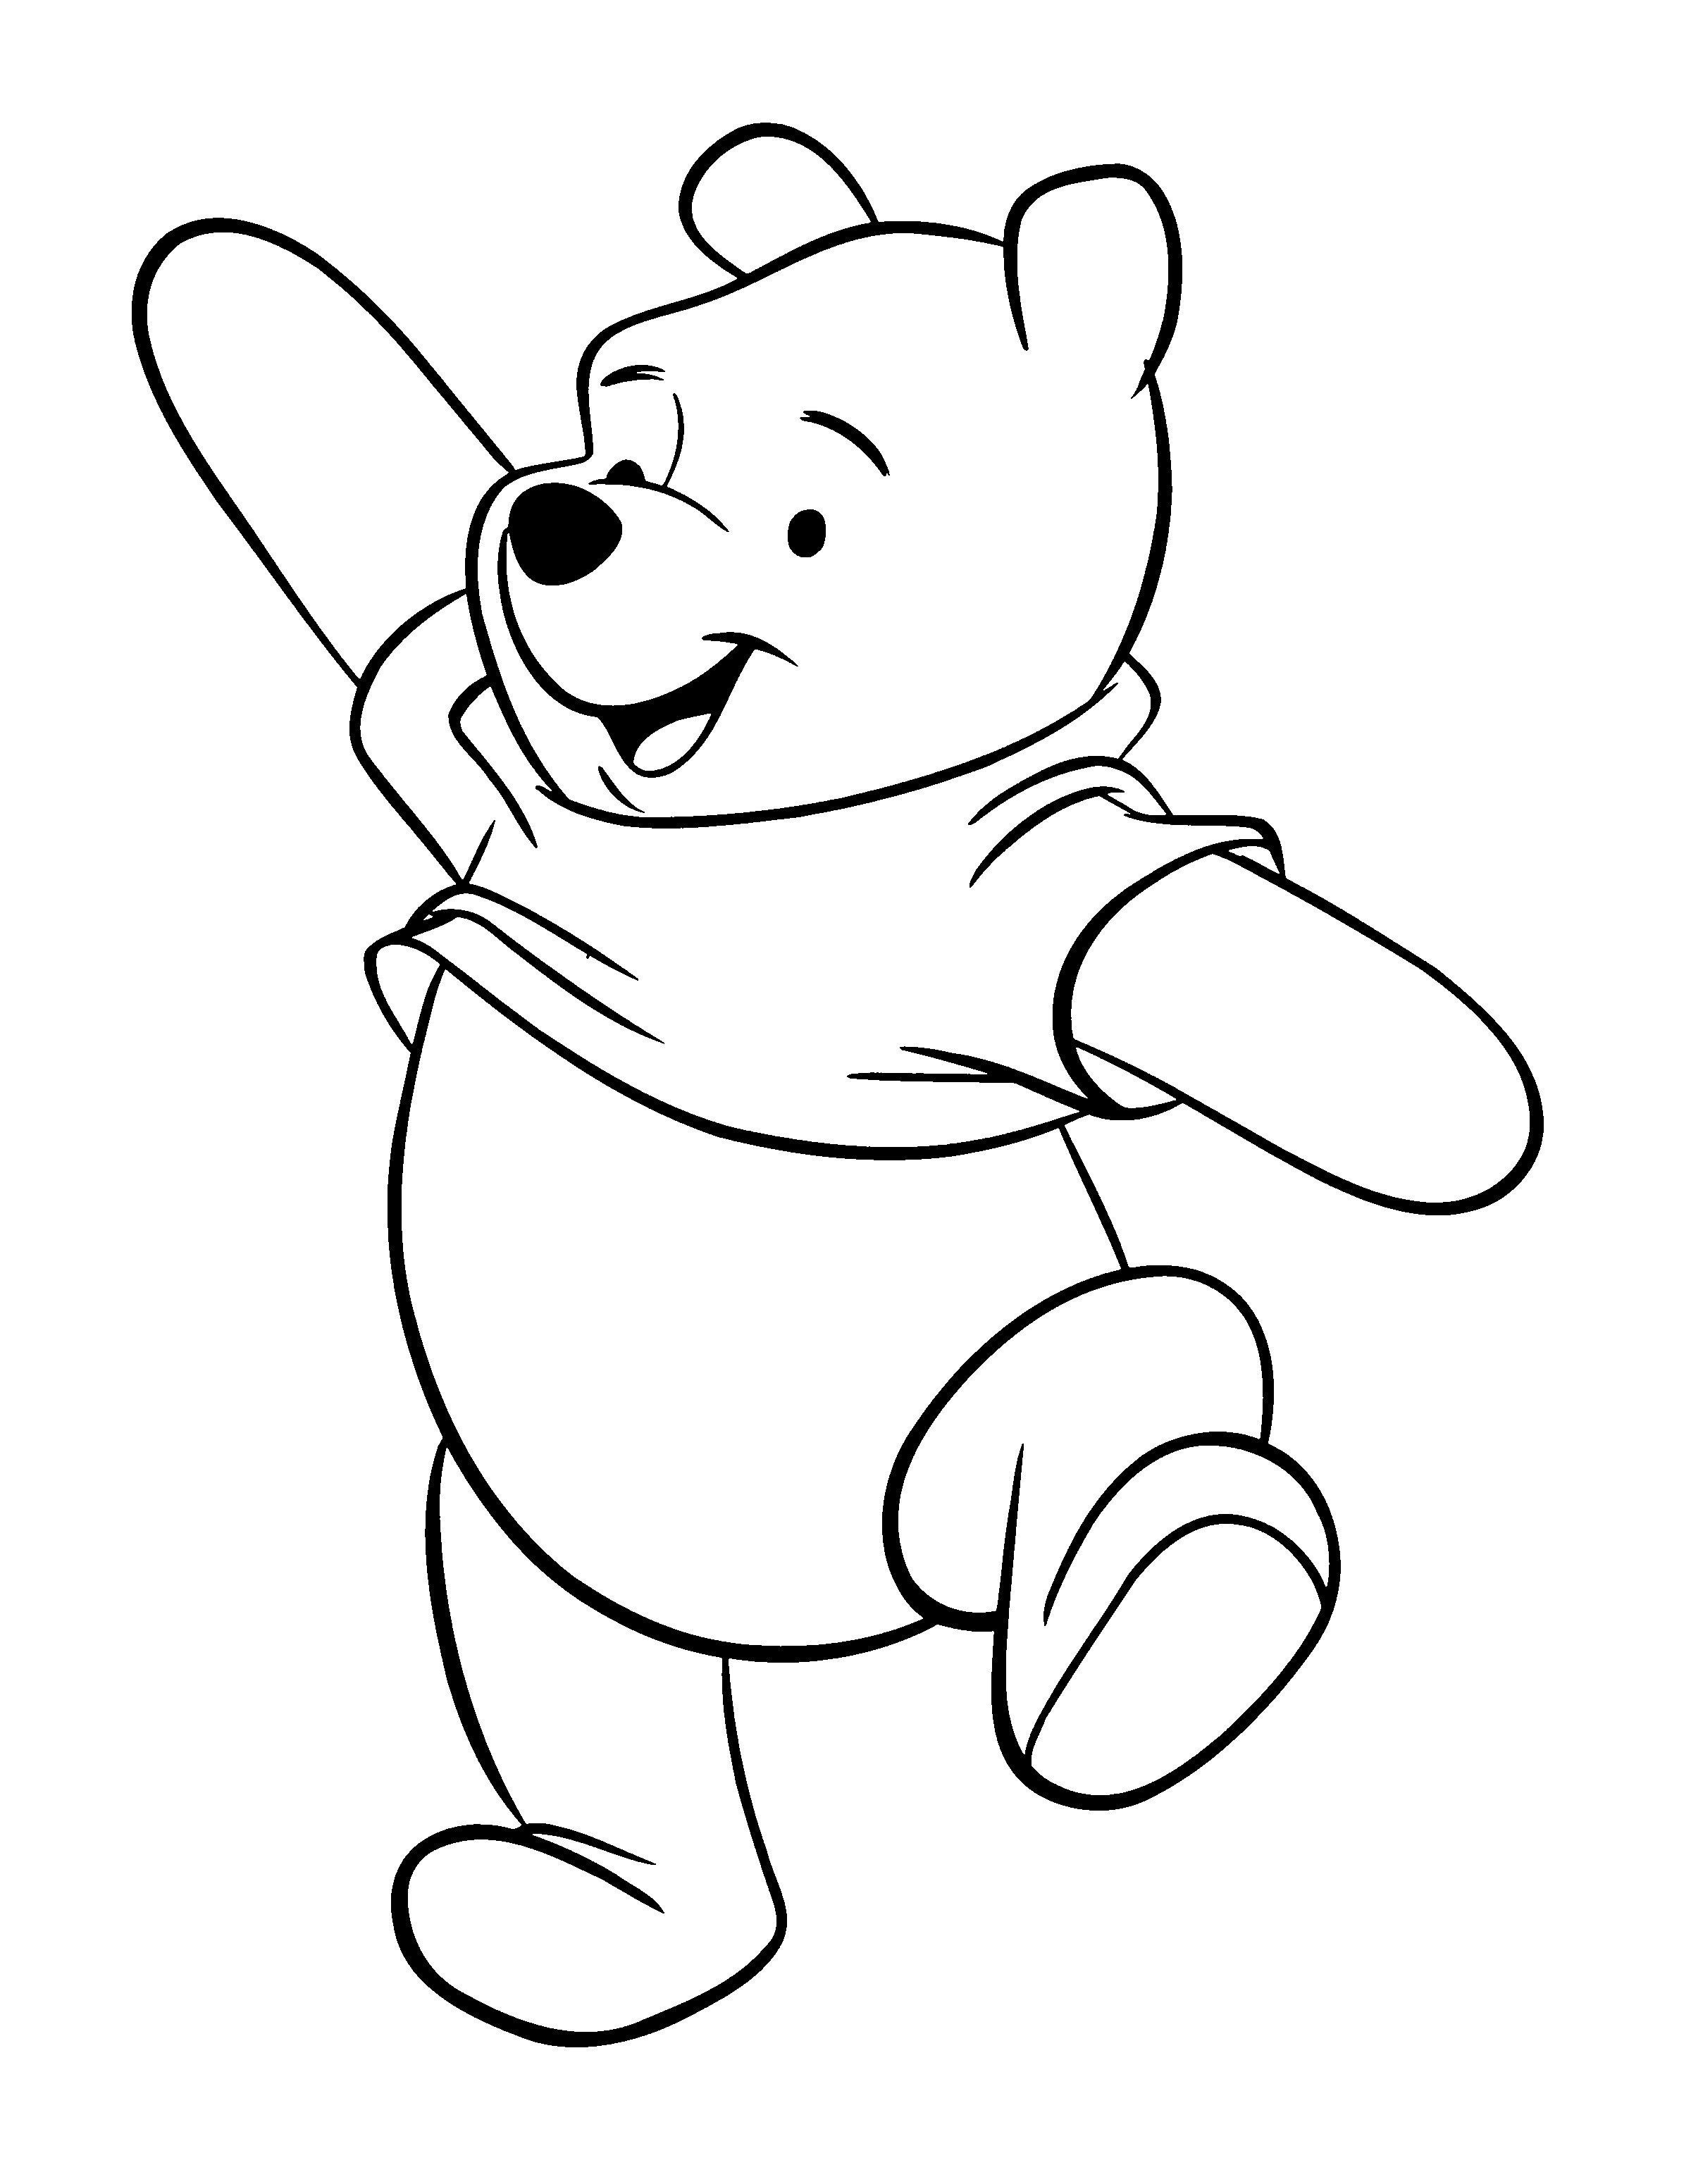 Coloring Page   Winnie The Pooh Coloring Pages 20   Coloring Home